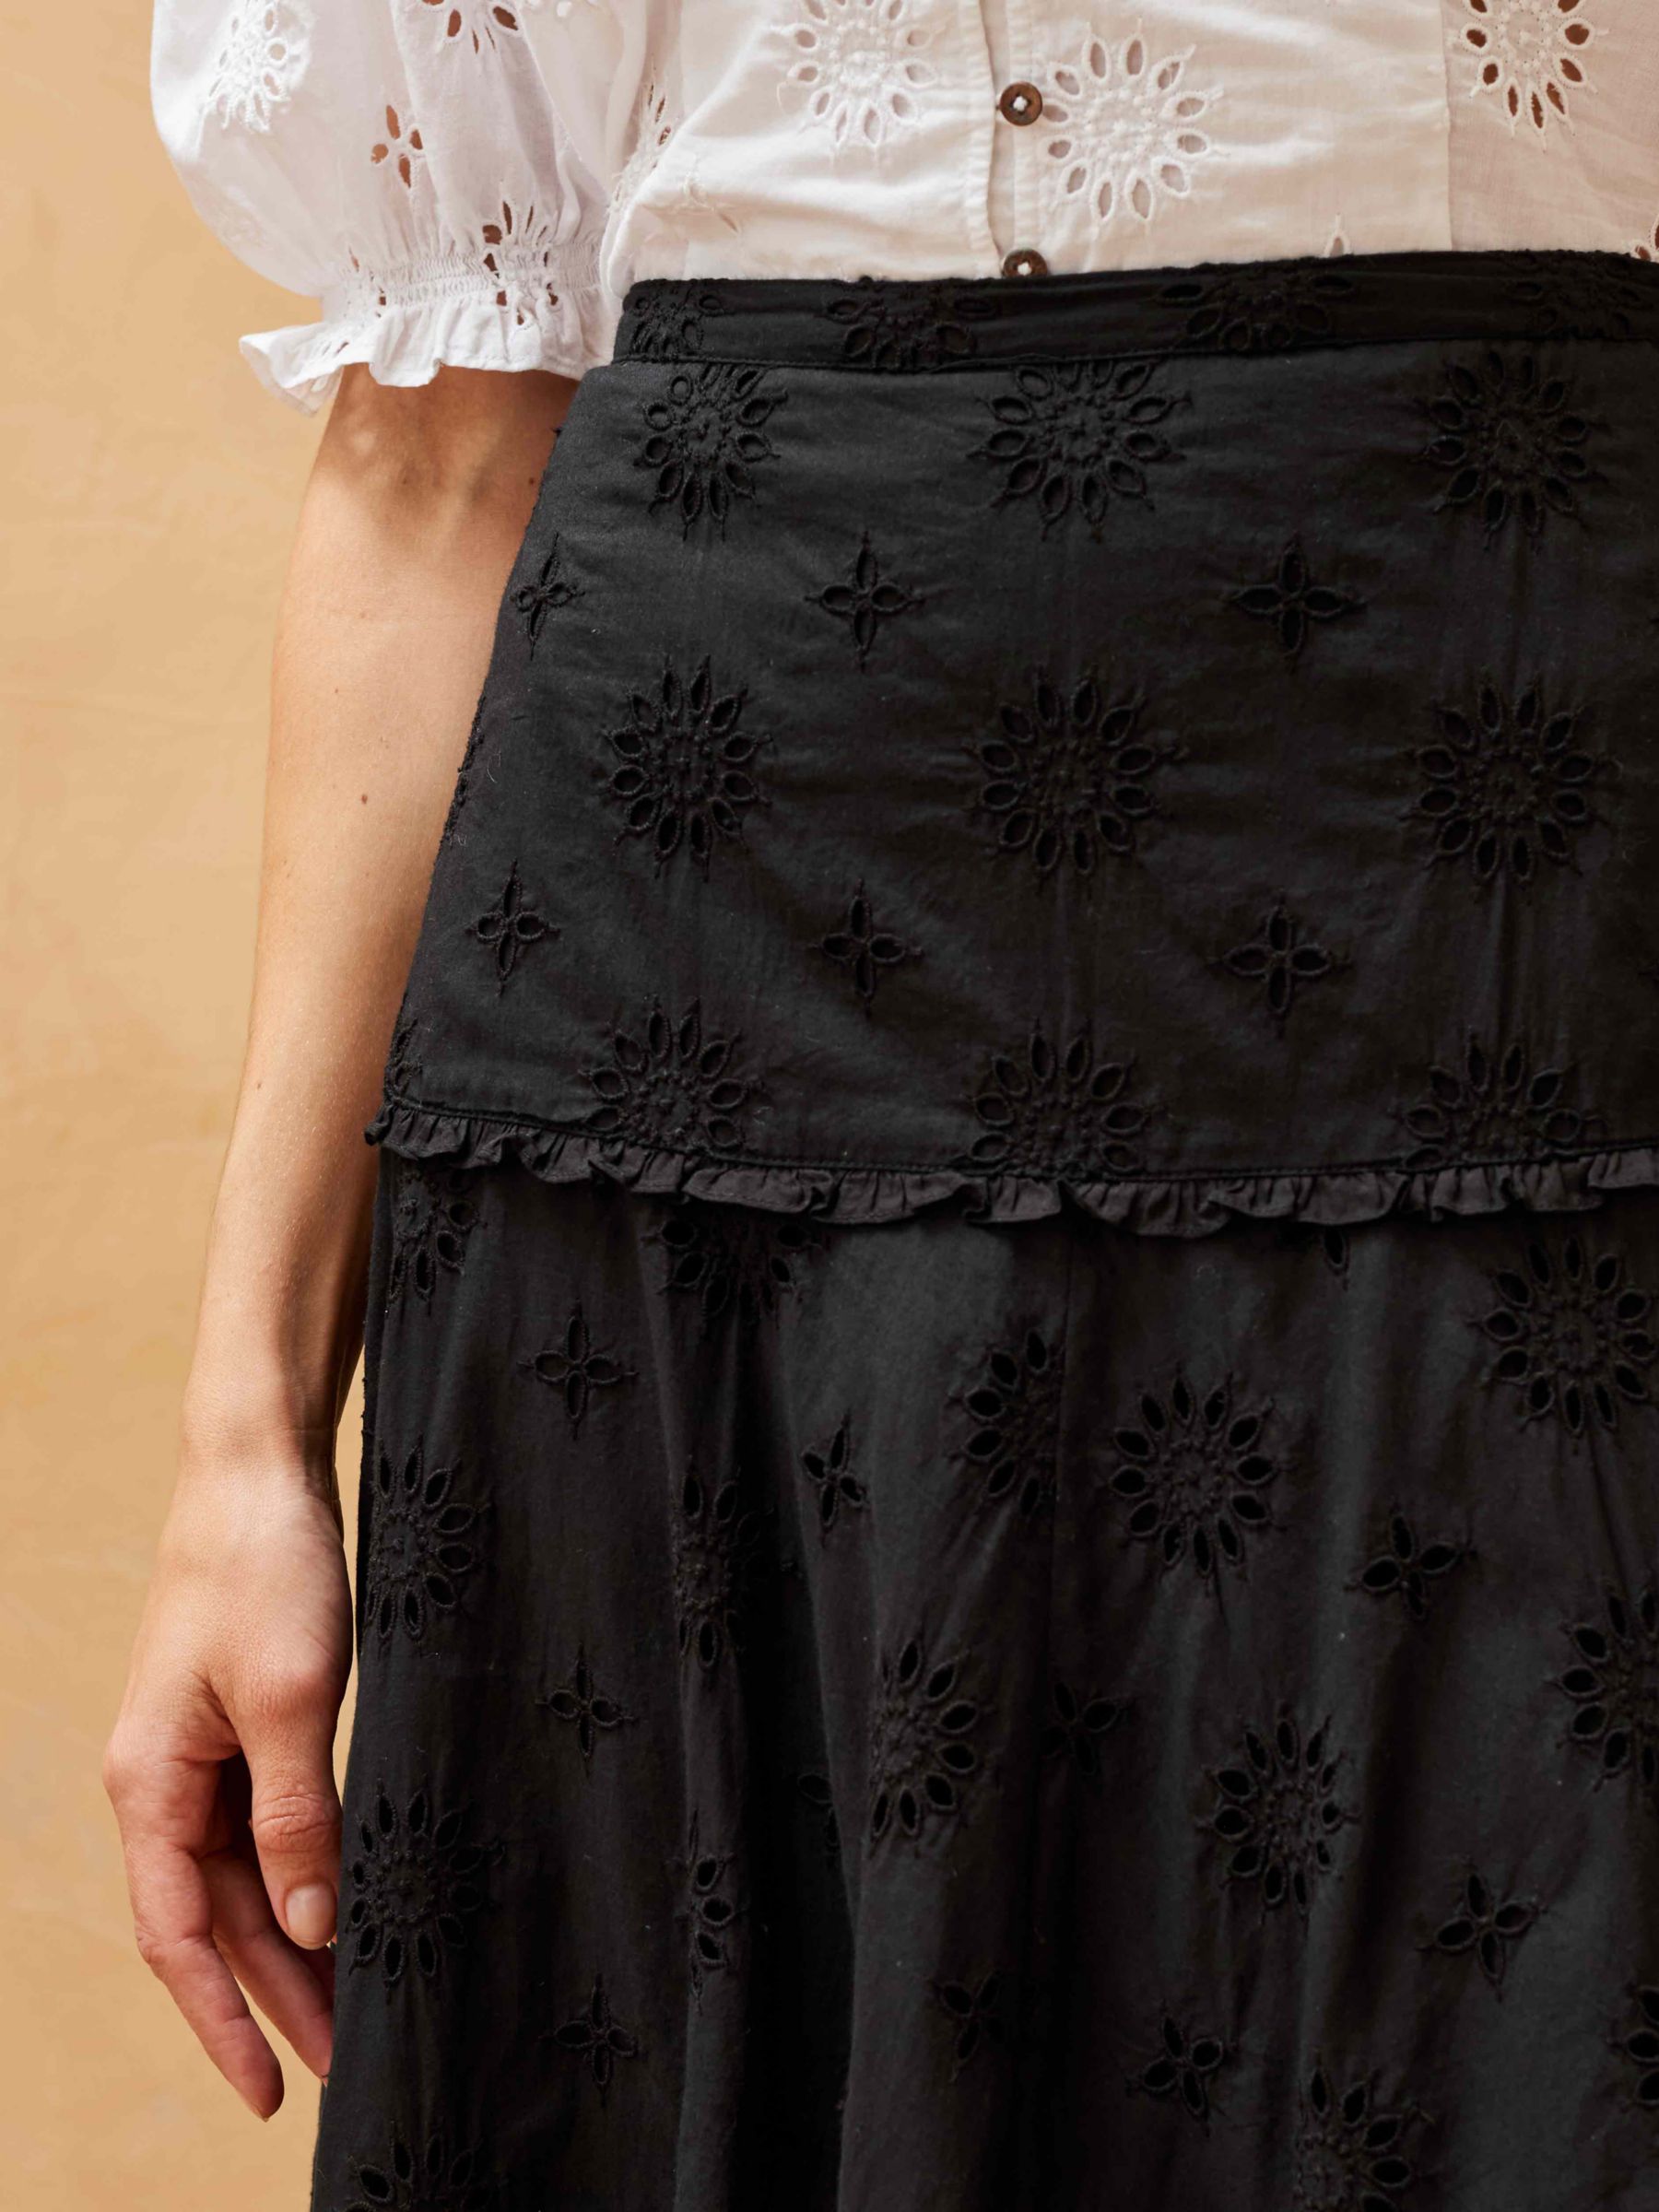 Buy Brora Organic Cotton Broderie Anglaise Midi Skirt Online at johnlewis.com